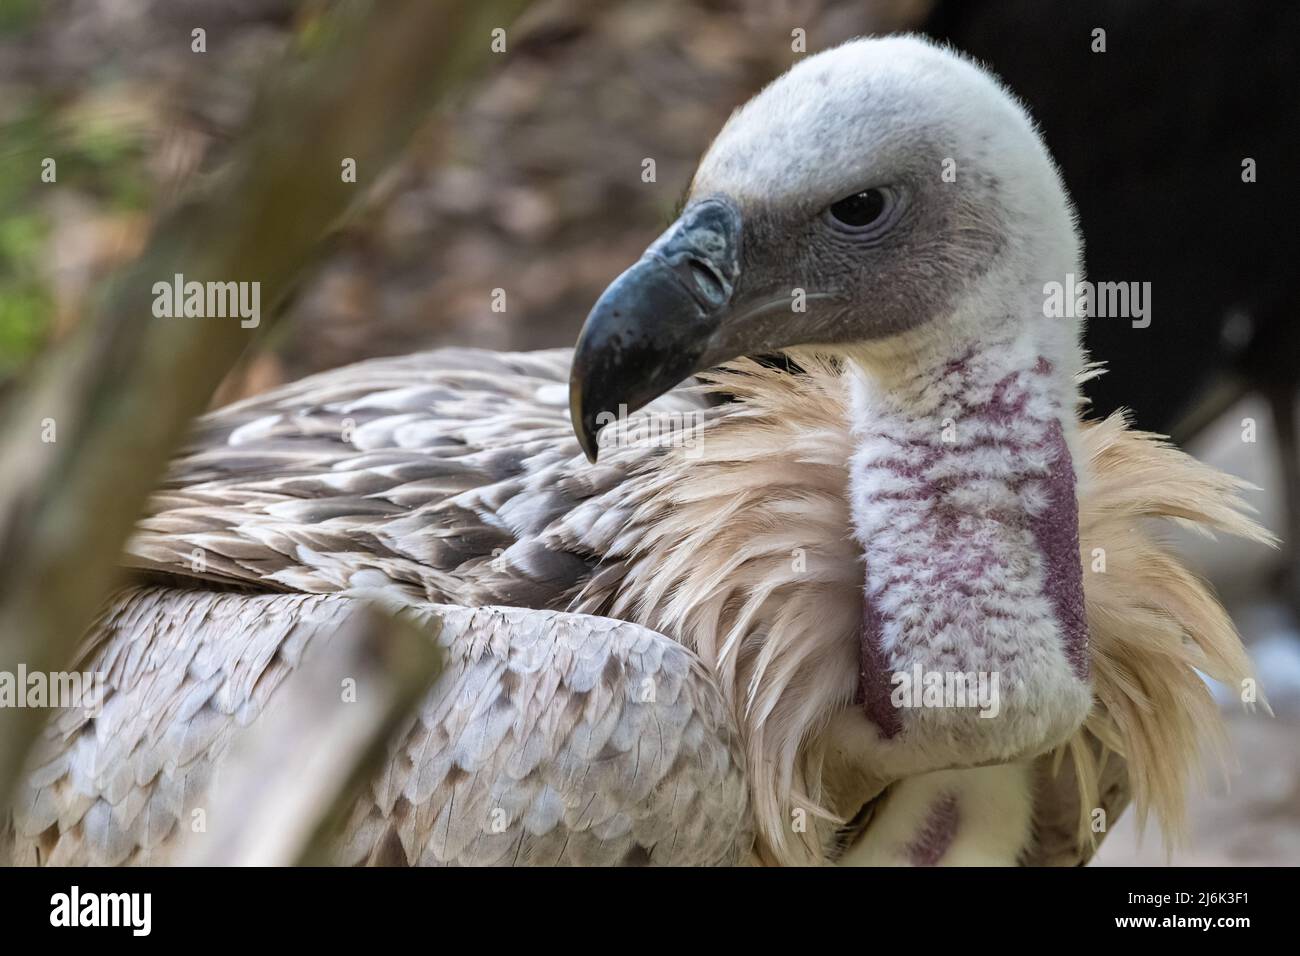 Cape Griffon Vulture (Gyps coprotheres) at St. Augustine Alligator Farm Zoological Park in St. Augustine, Florida. (USA) Stock Photo